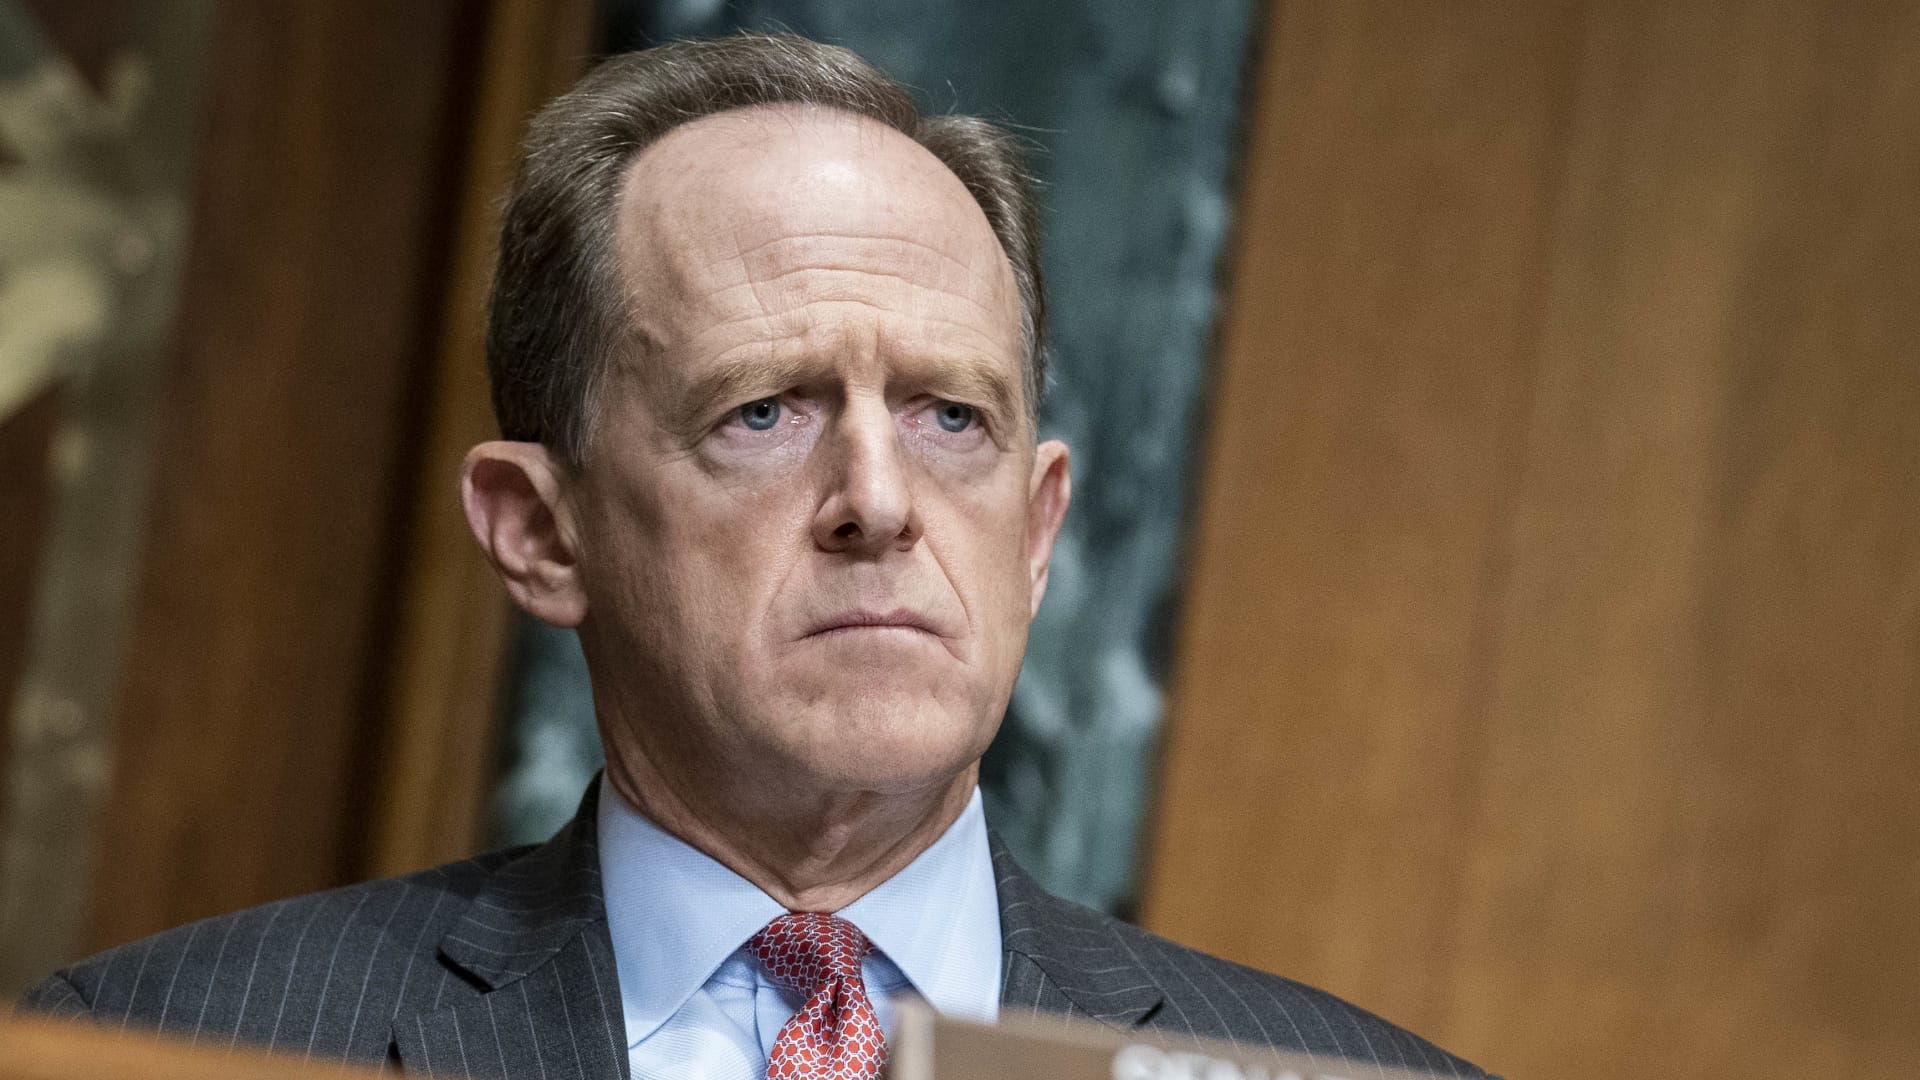 Senator Pat Toomey (R-PA) questions Treasury Secretary Steven Mnuchin during a hearing of the Congressional Oversight Commission on December 10, 2020 on Capitol Hill in Washington, DC.